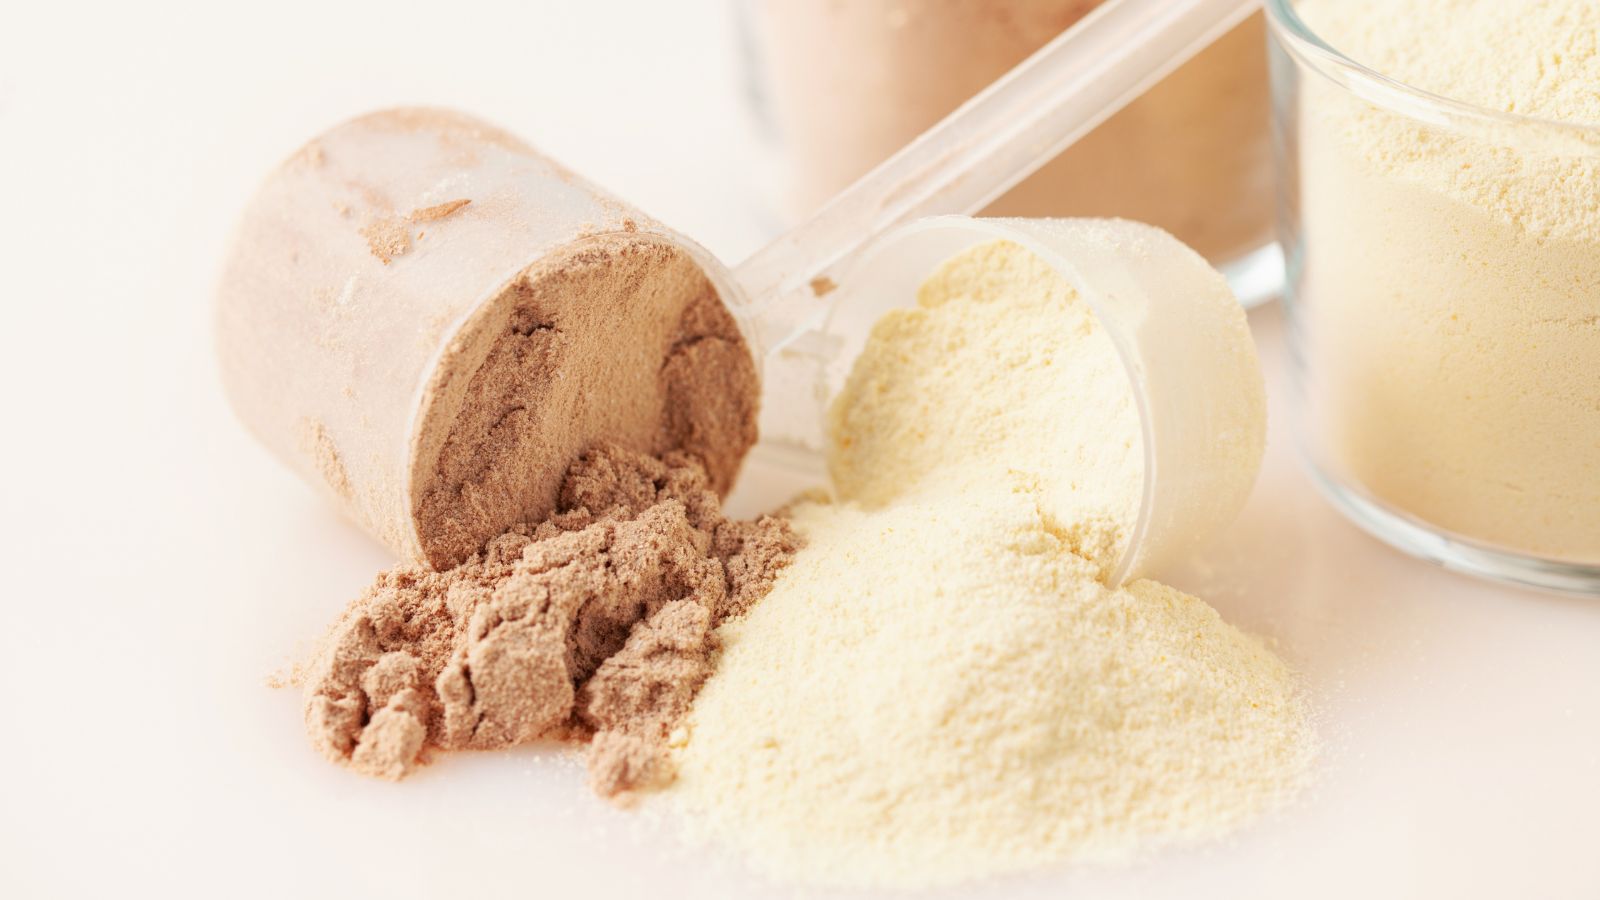 What Is Grass Fed Whey Protein, and Why Is It Different? – AminoLean